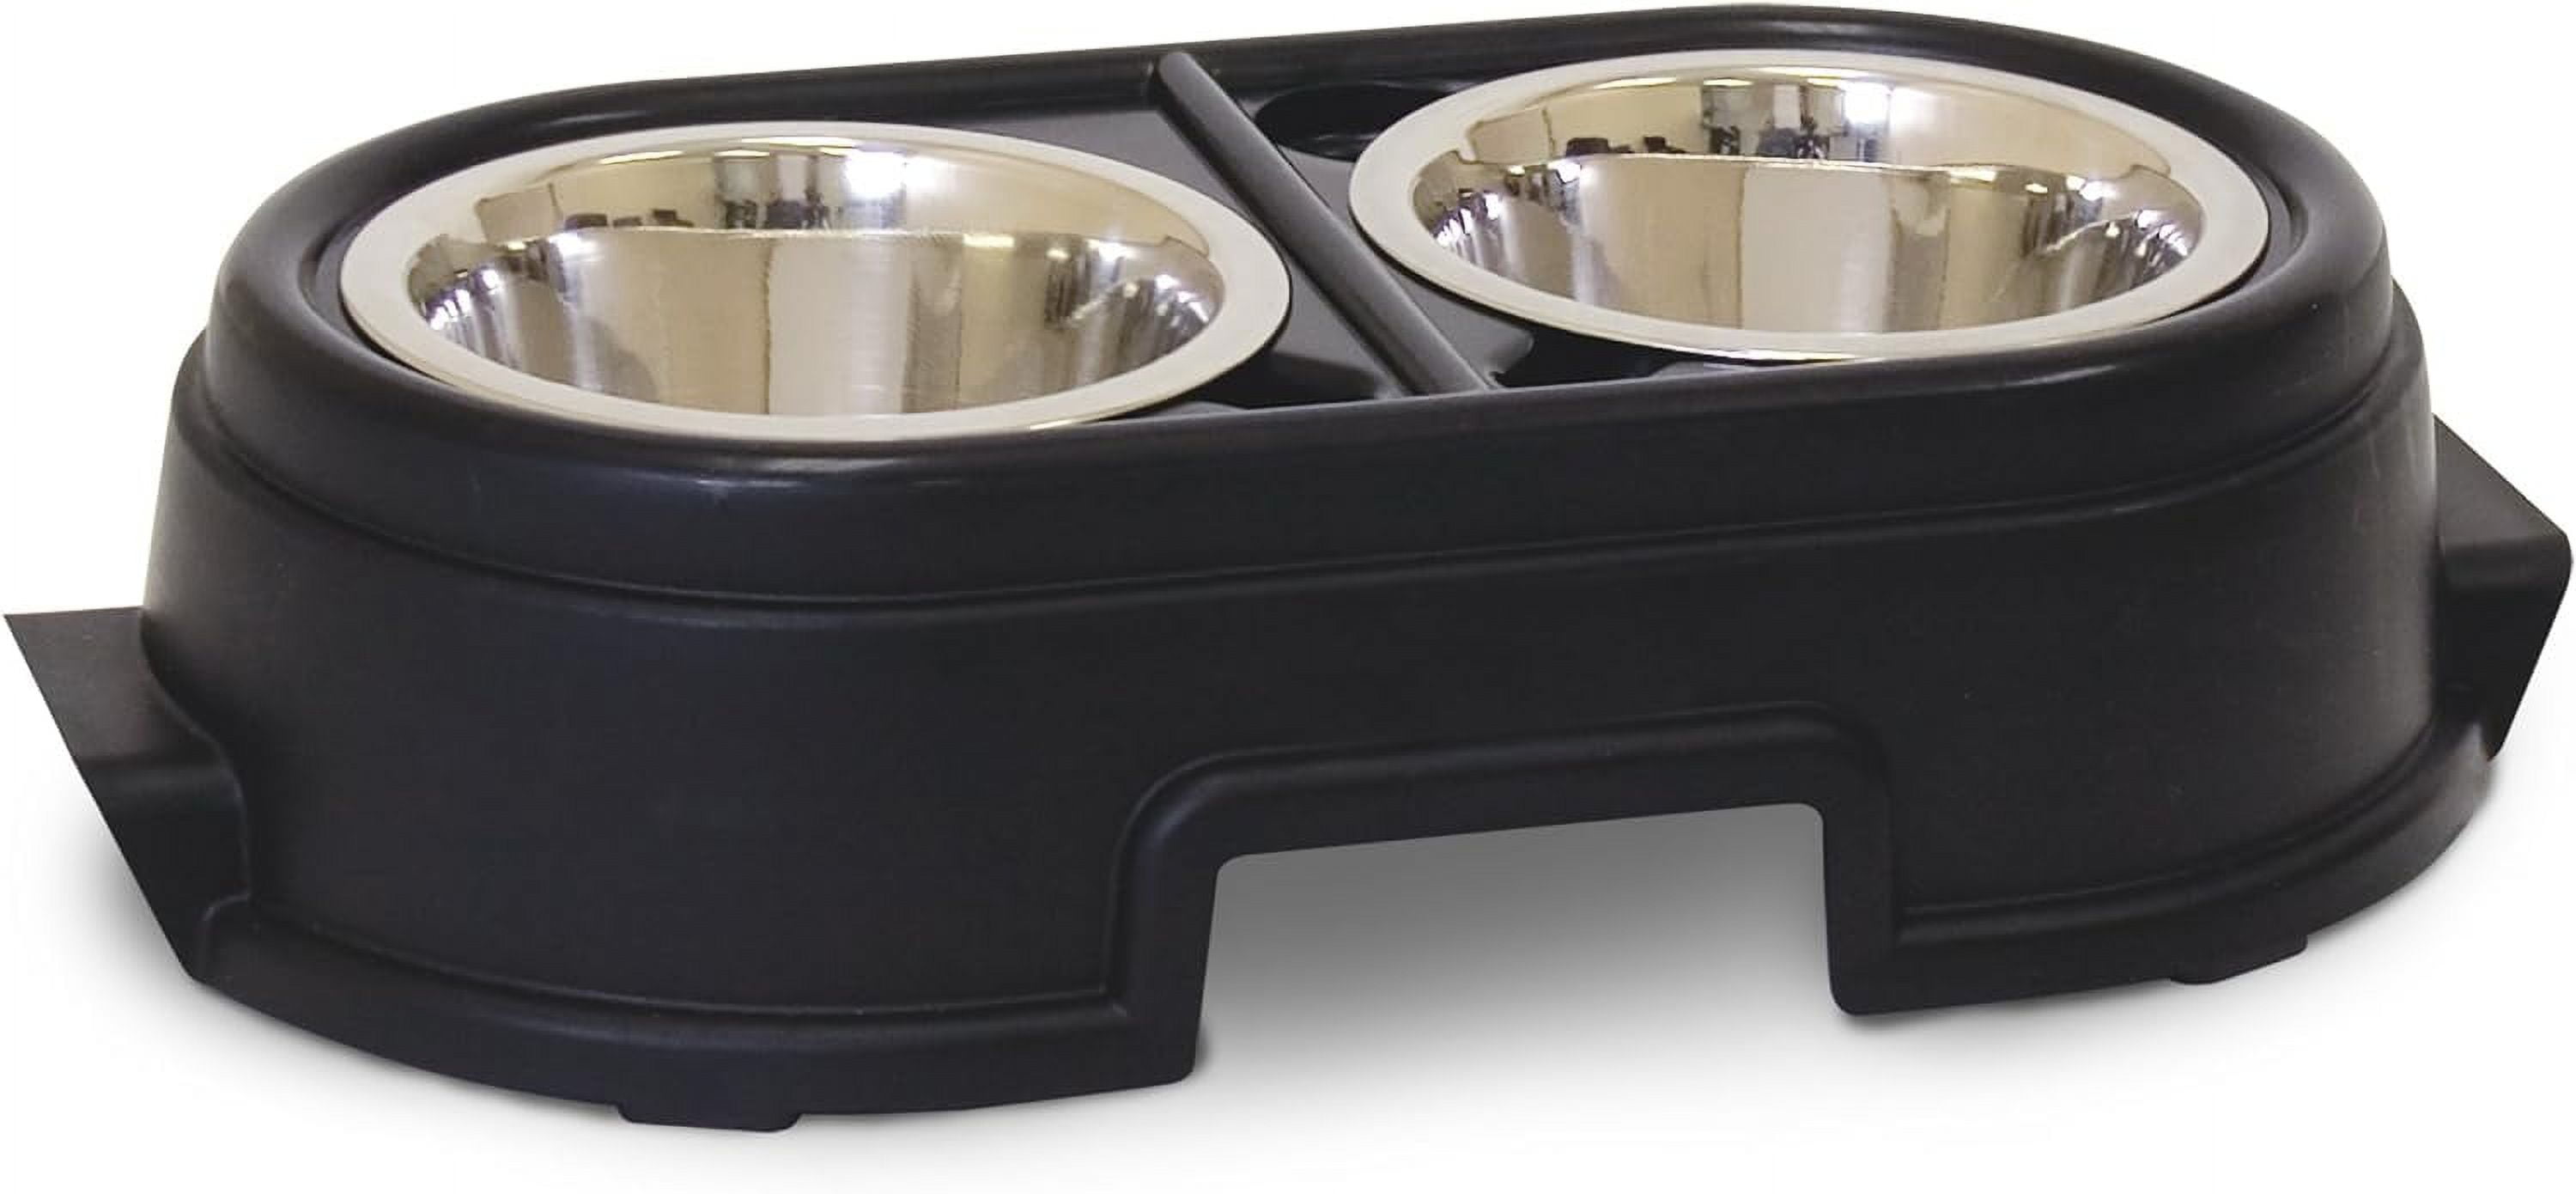 Small Dog Bowls for Medium Dogs - Buy Online